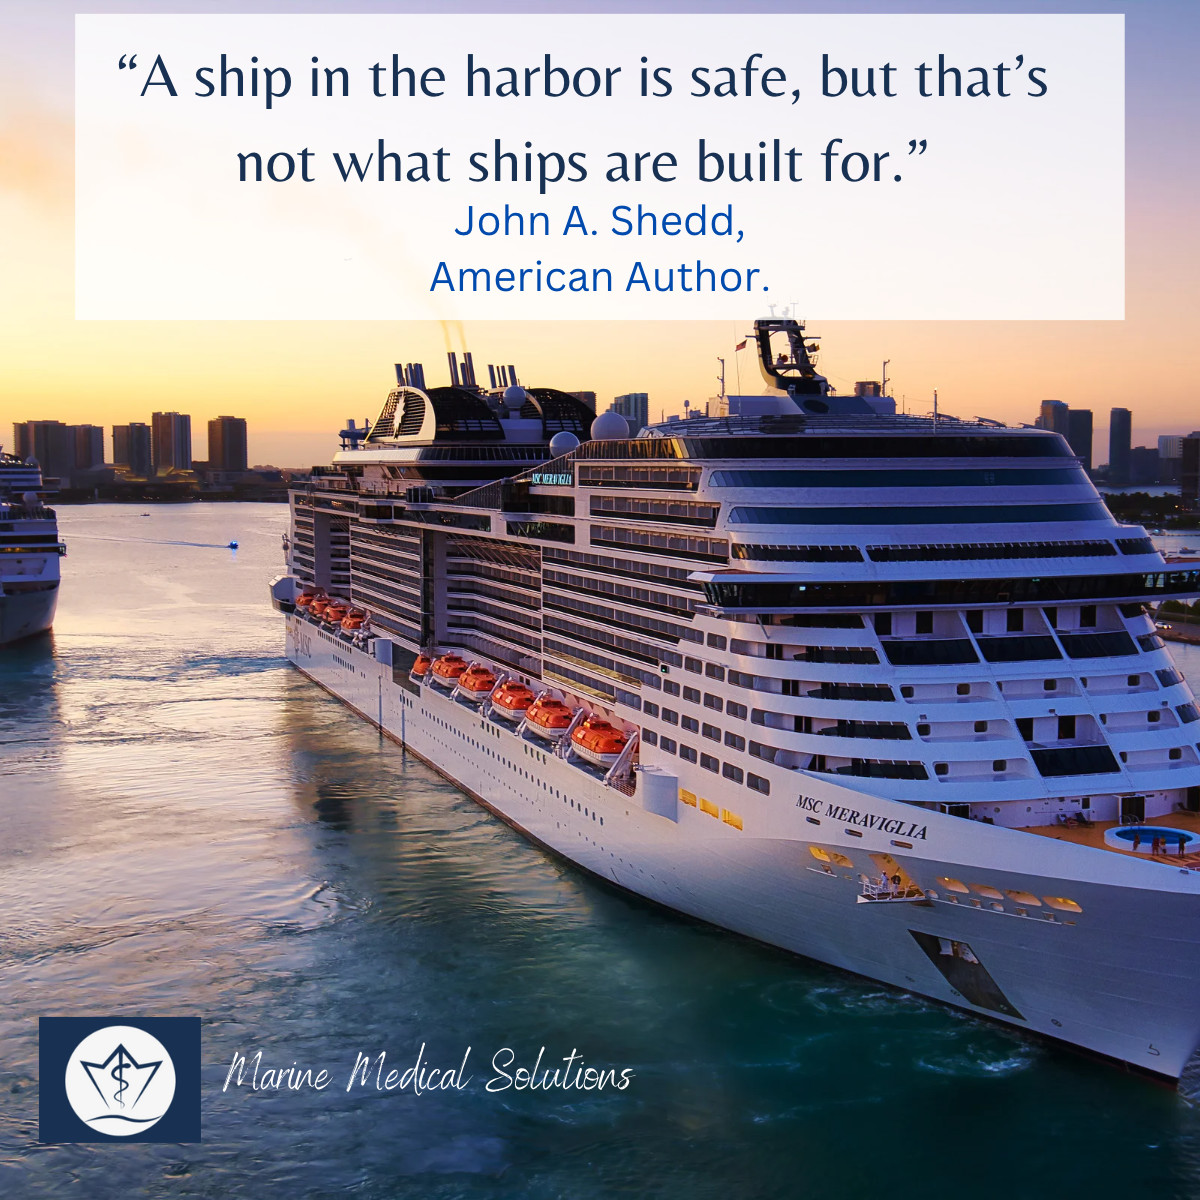 As we navigate a new week, remember: comfort zones may be safe harbors, but growth happens beyond. Let's embrace challenges, make bold decisions, and chart our course for success. ⛵💼 #MondayMotivation #BusinessAdventure #EntrepreneurialSpirit #NavigateSuccess #ChartYourCourse